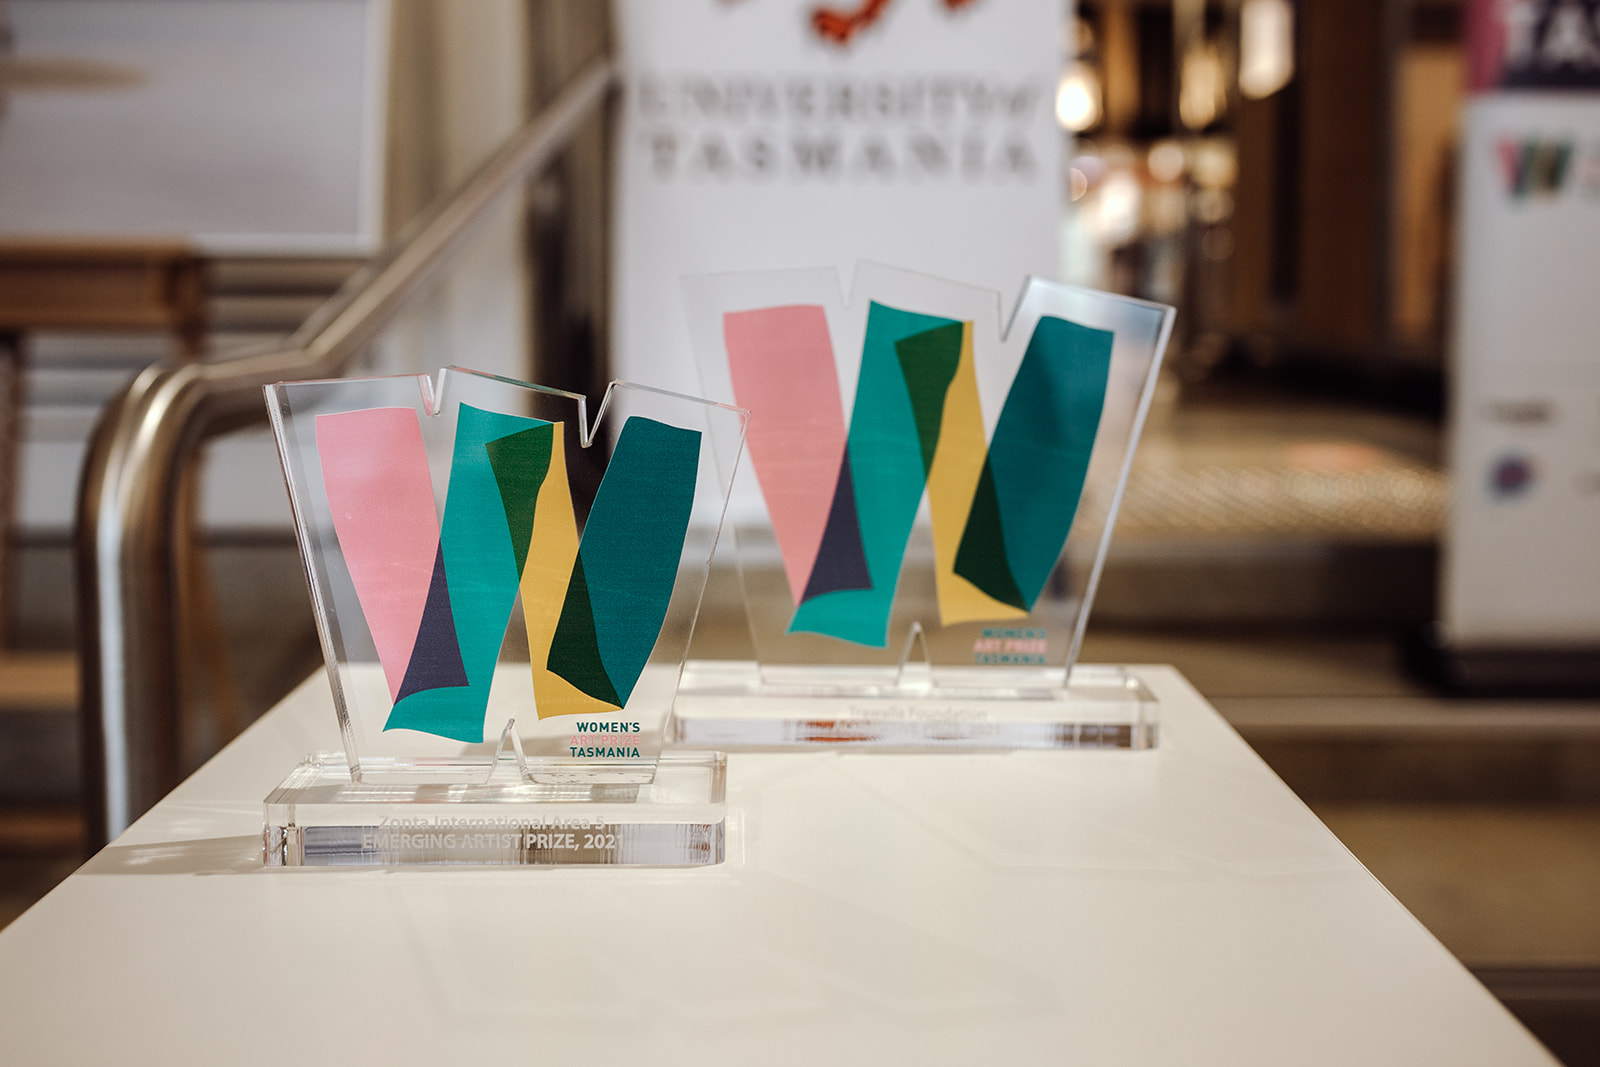 Image of Women's Art Prize awards presented to recipients